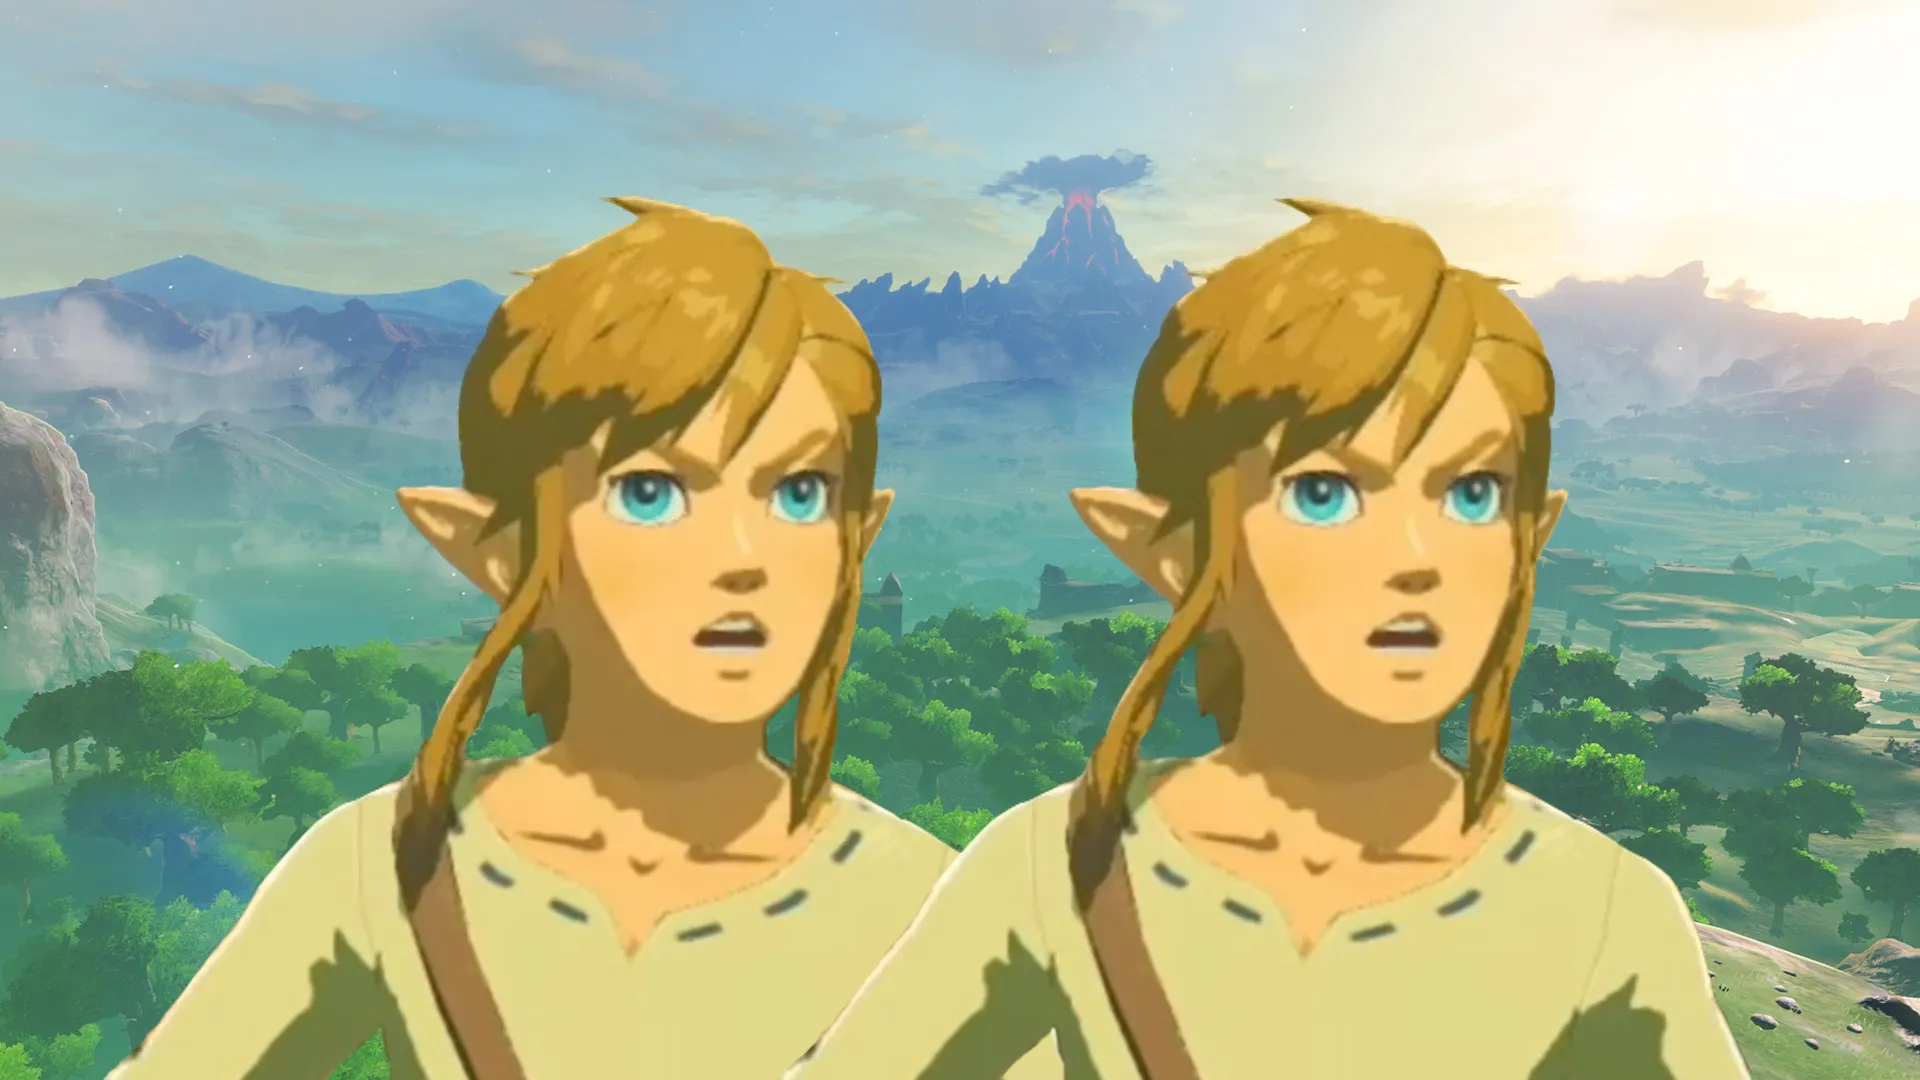  Aggressive Nintendo copyright strikes on YouTube push Breath of the Wild multiplayer modders into taking down mod 